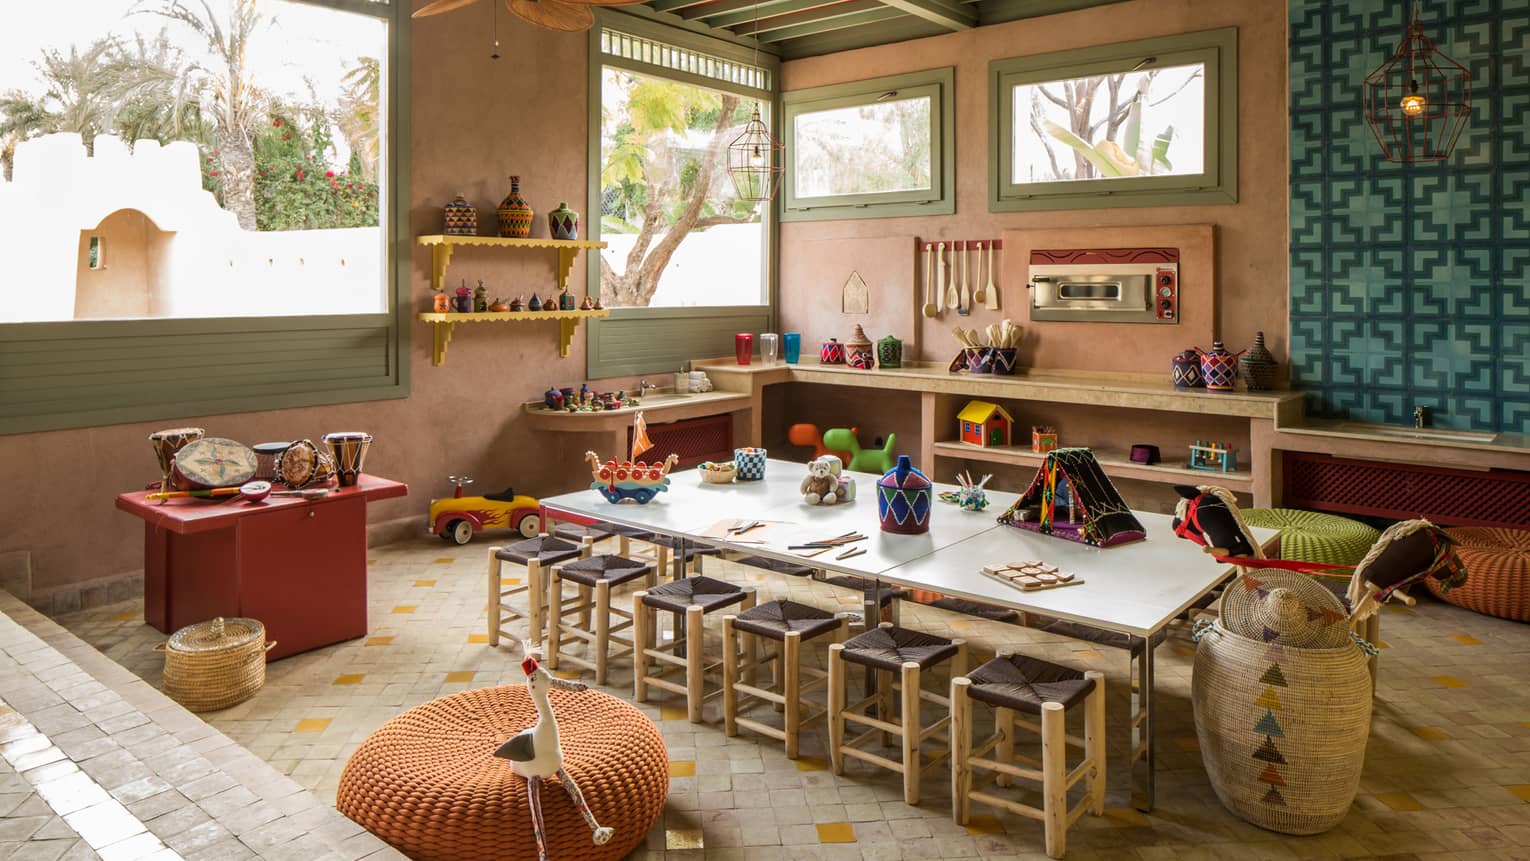 Kids Club long craft table with stools, toys on shelves along wall under sunny windows